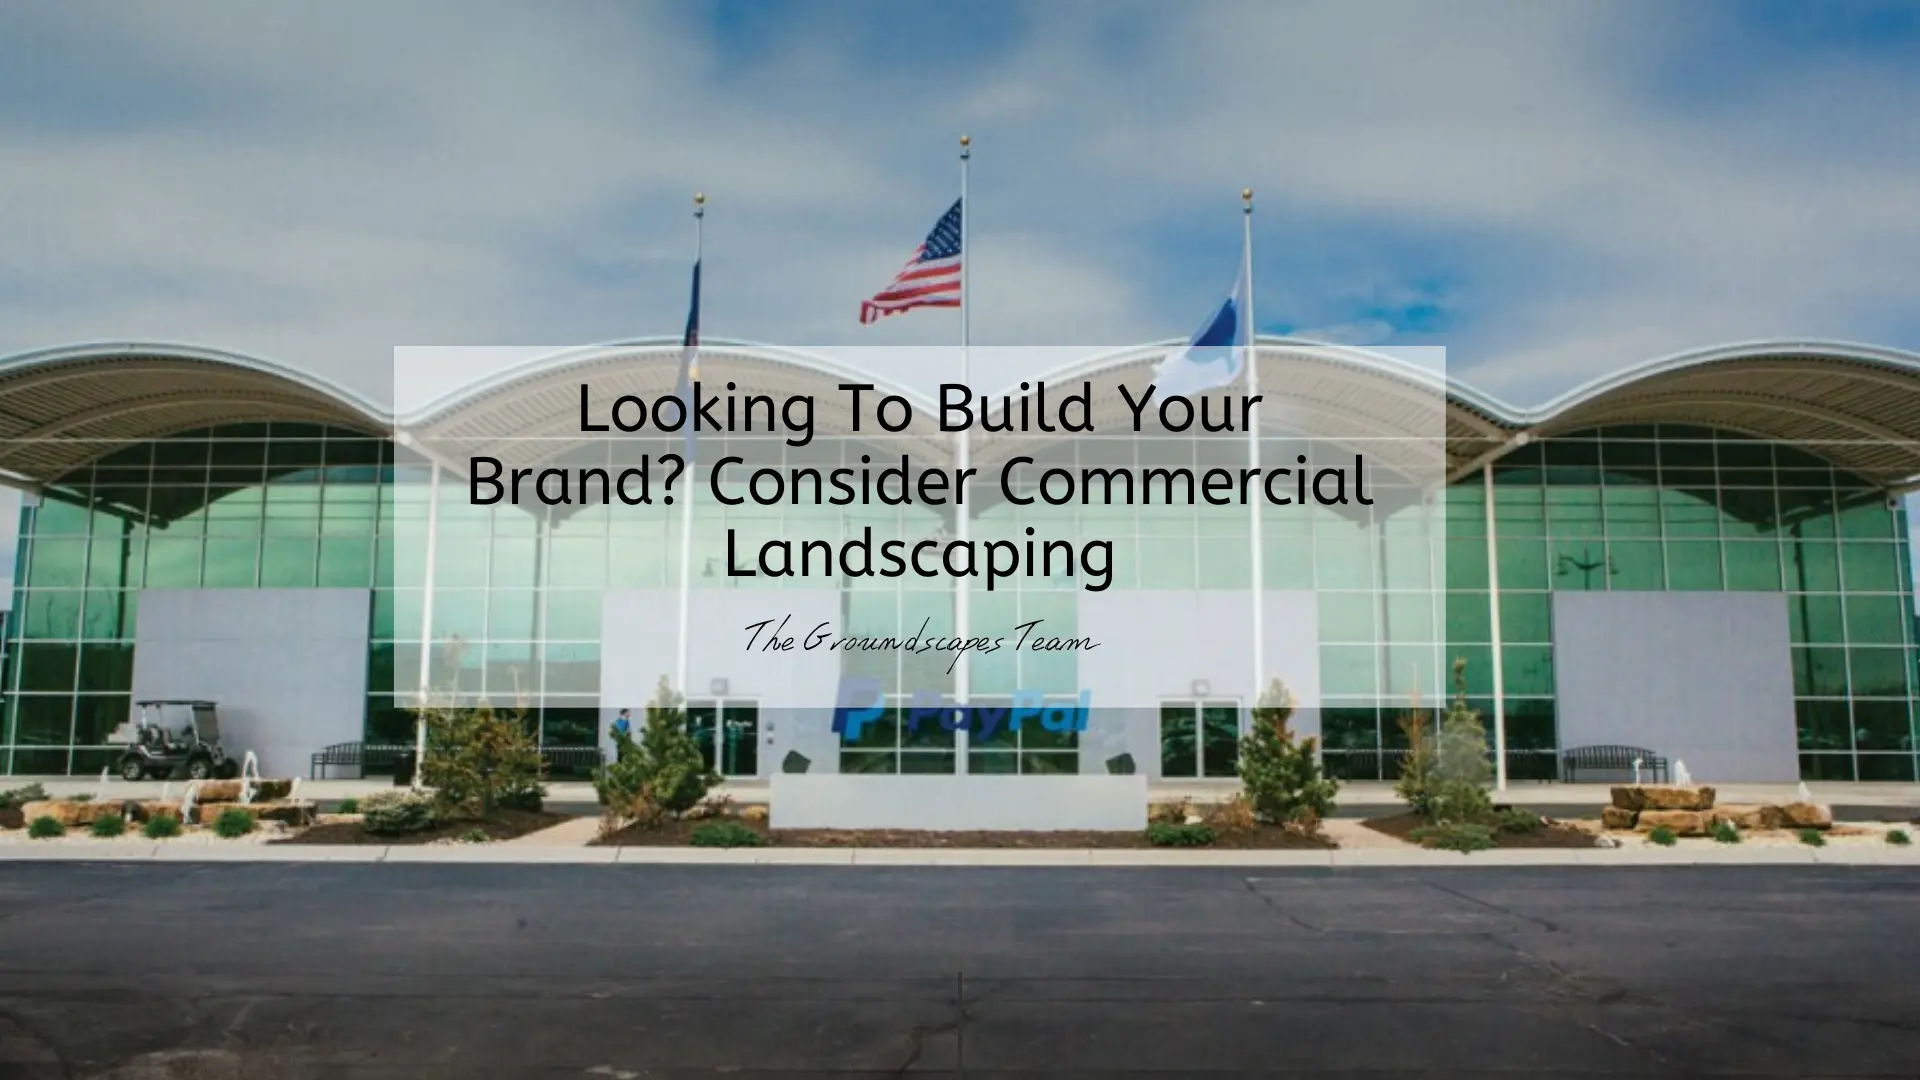 Looking To Build Your Brand? Consider Commercial Landscaping